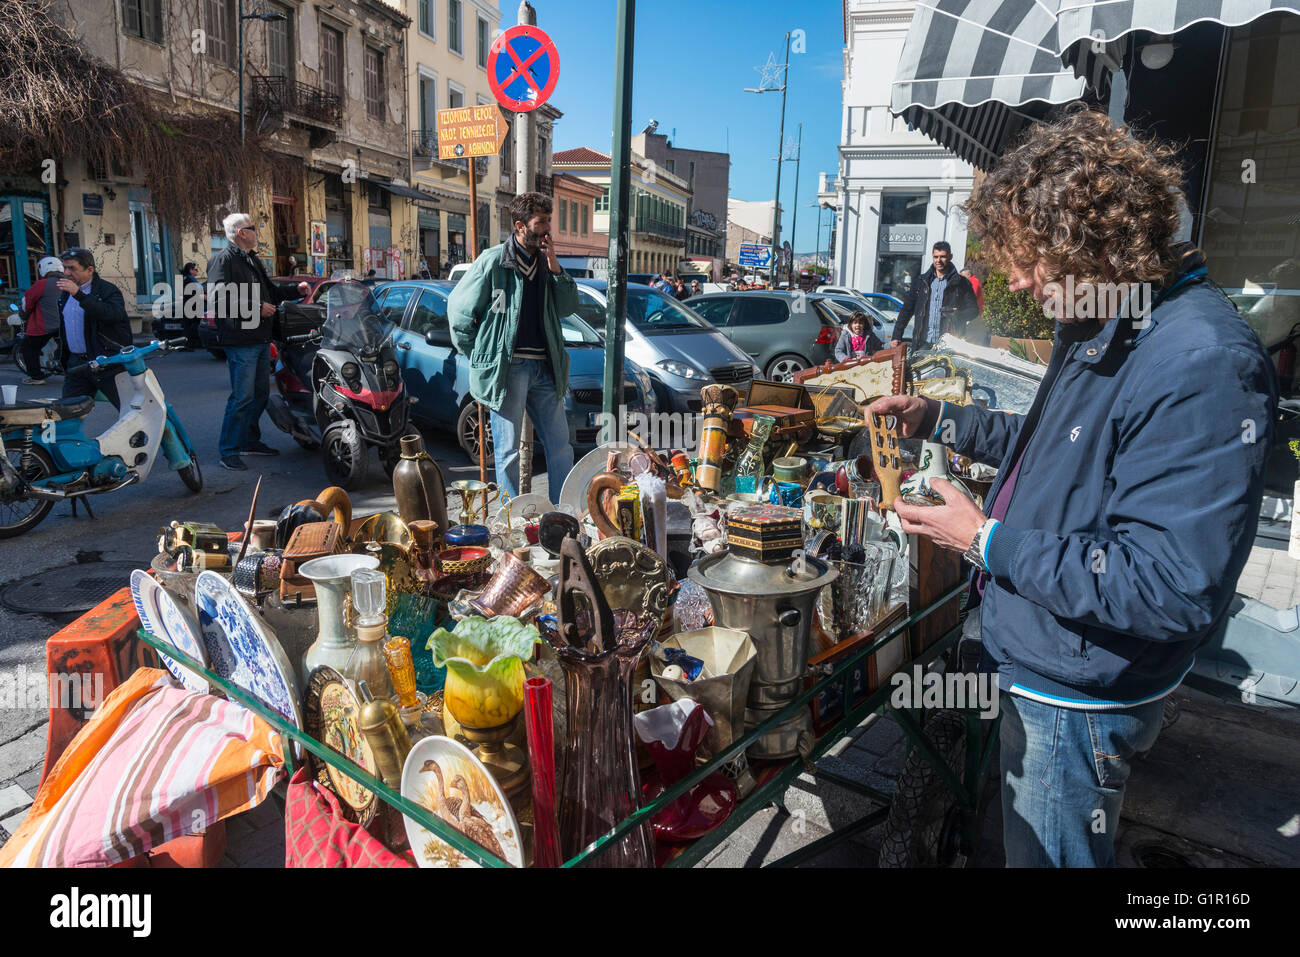 The antiques and bric-a-brac market at Monastiraki, in the centre of Athens, Greece Stock Photo